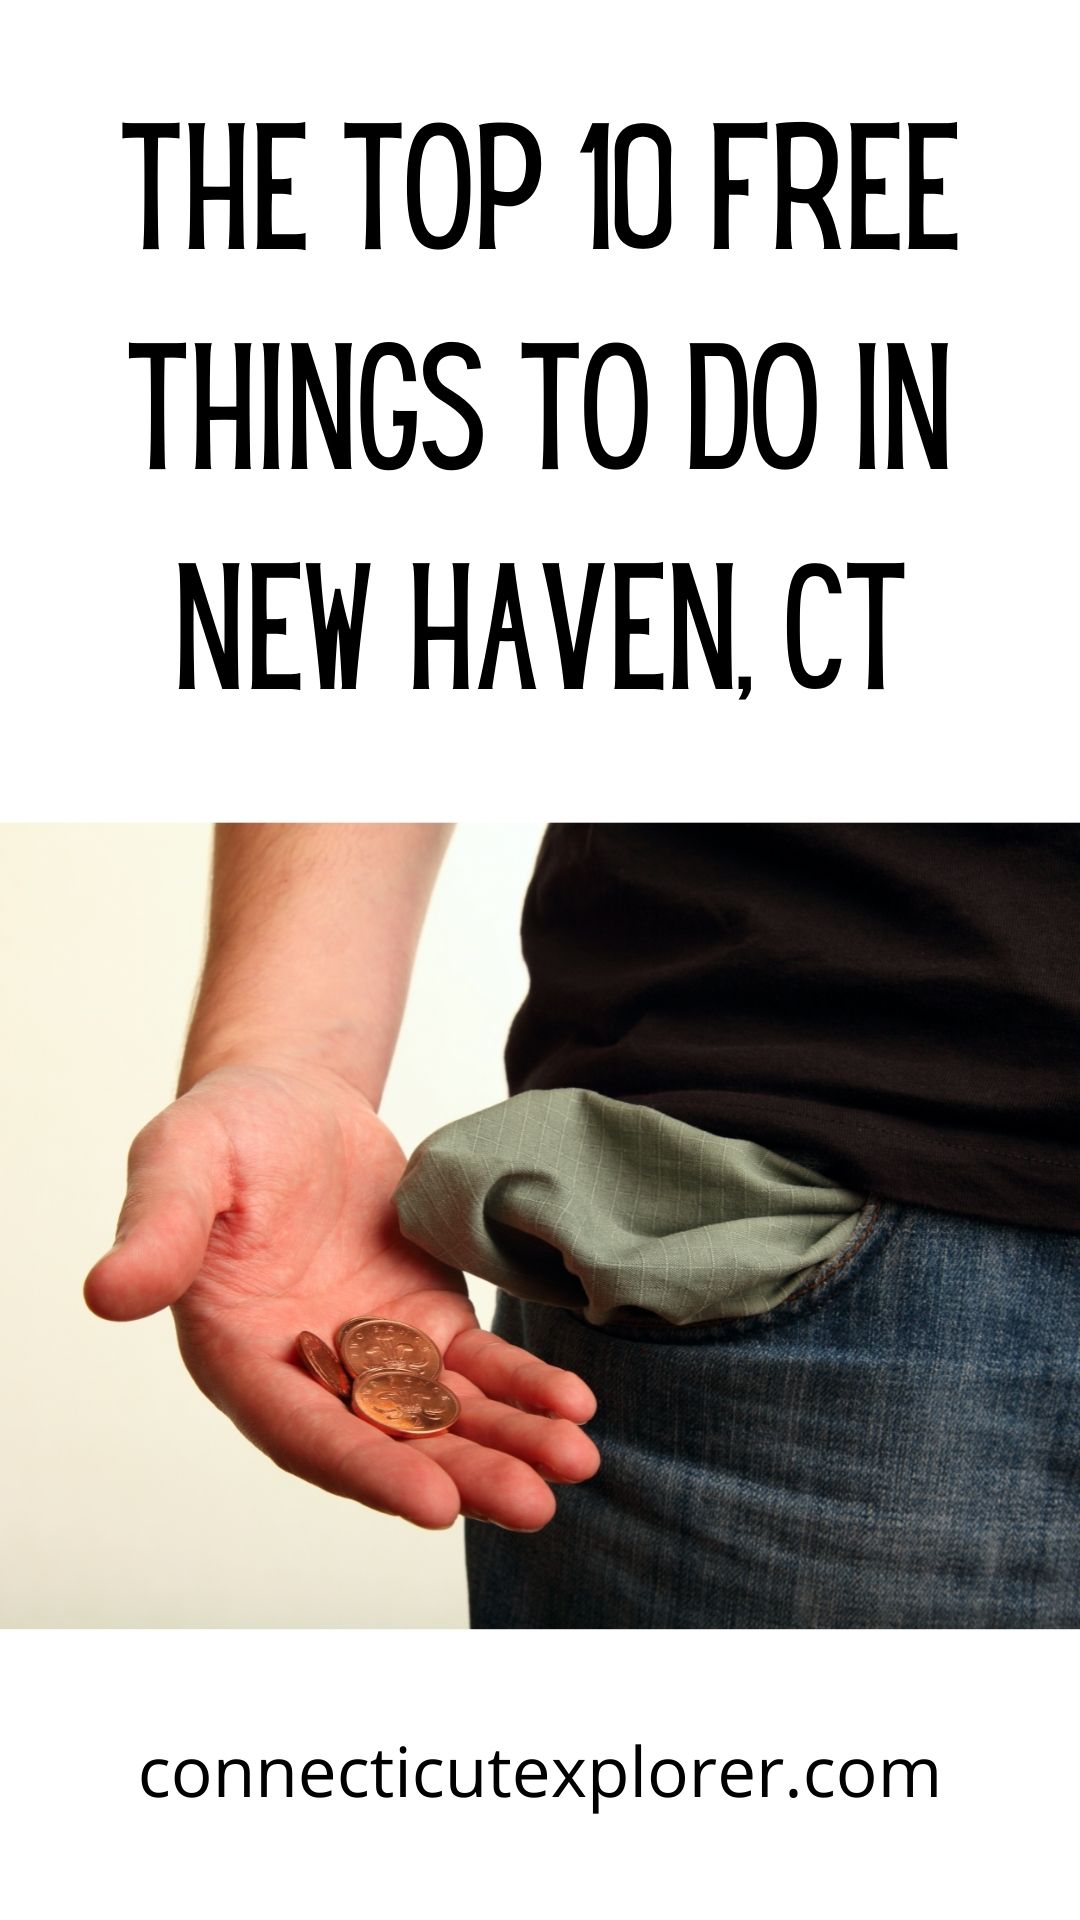 top 10 free things to do in new haven connecticut pinterest image.